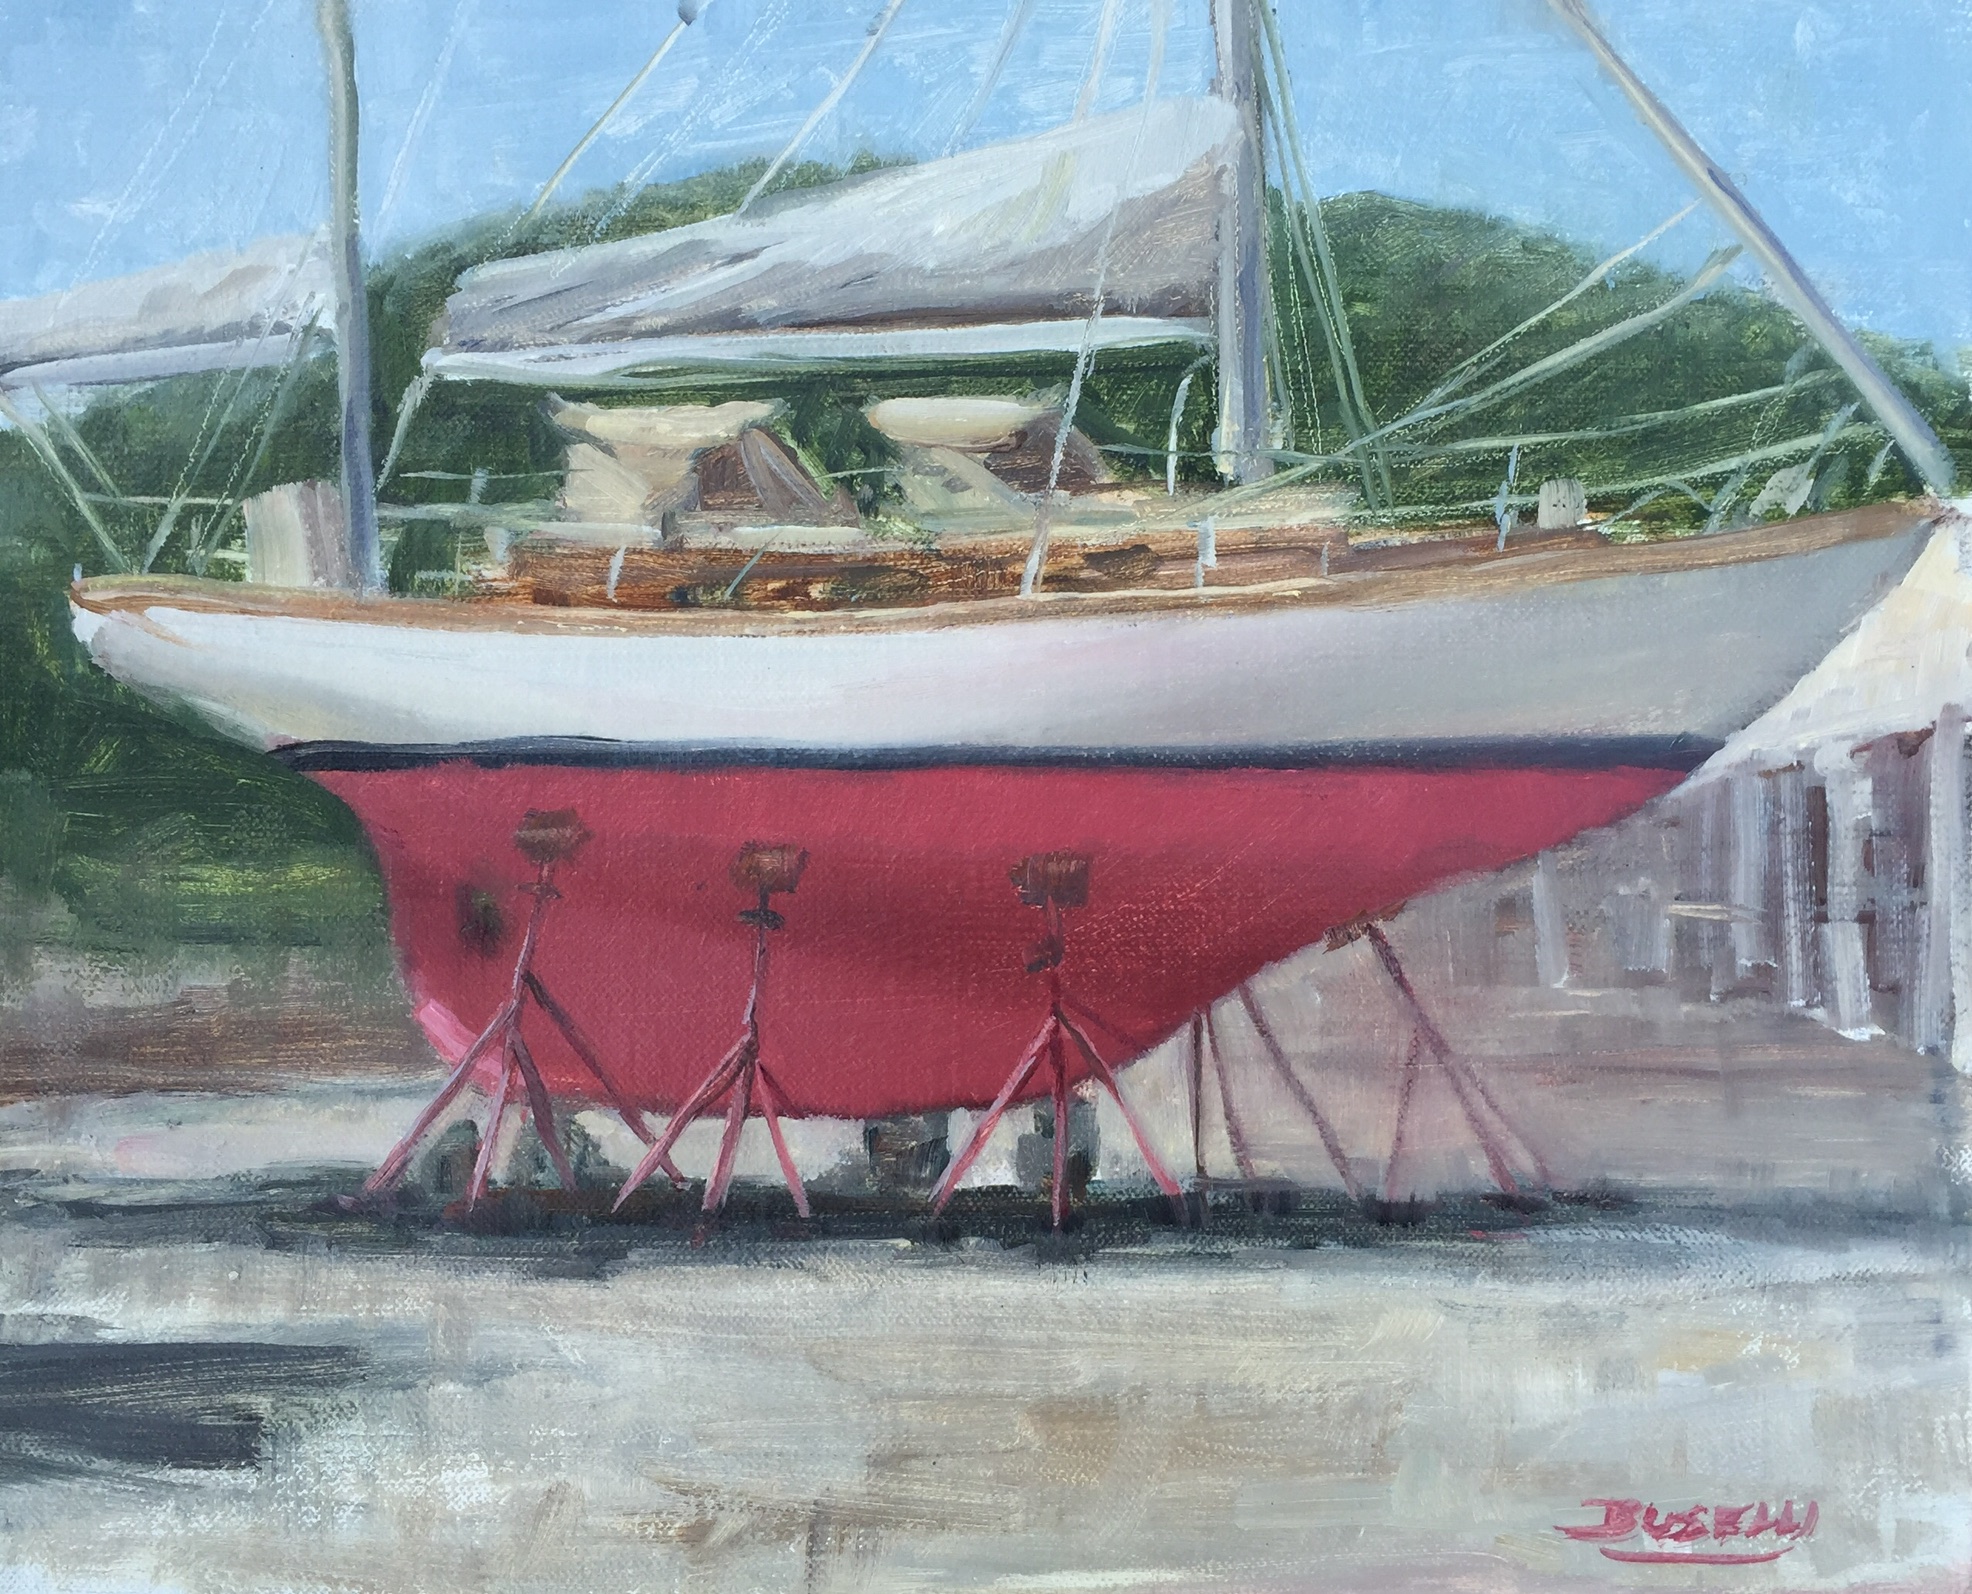  CHEOY LEE YAWL RIG - dry docked  oil on linen | 10” x 12”   BACK TO TOP  